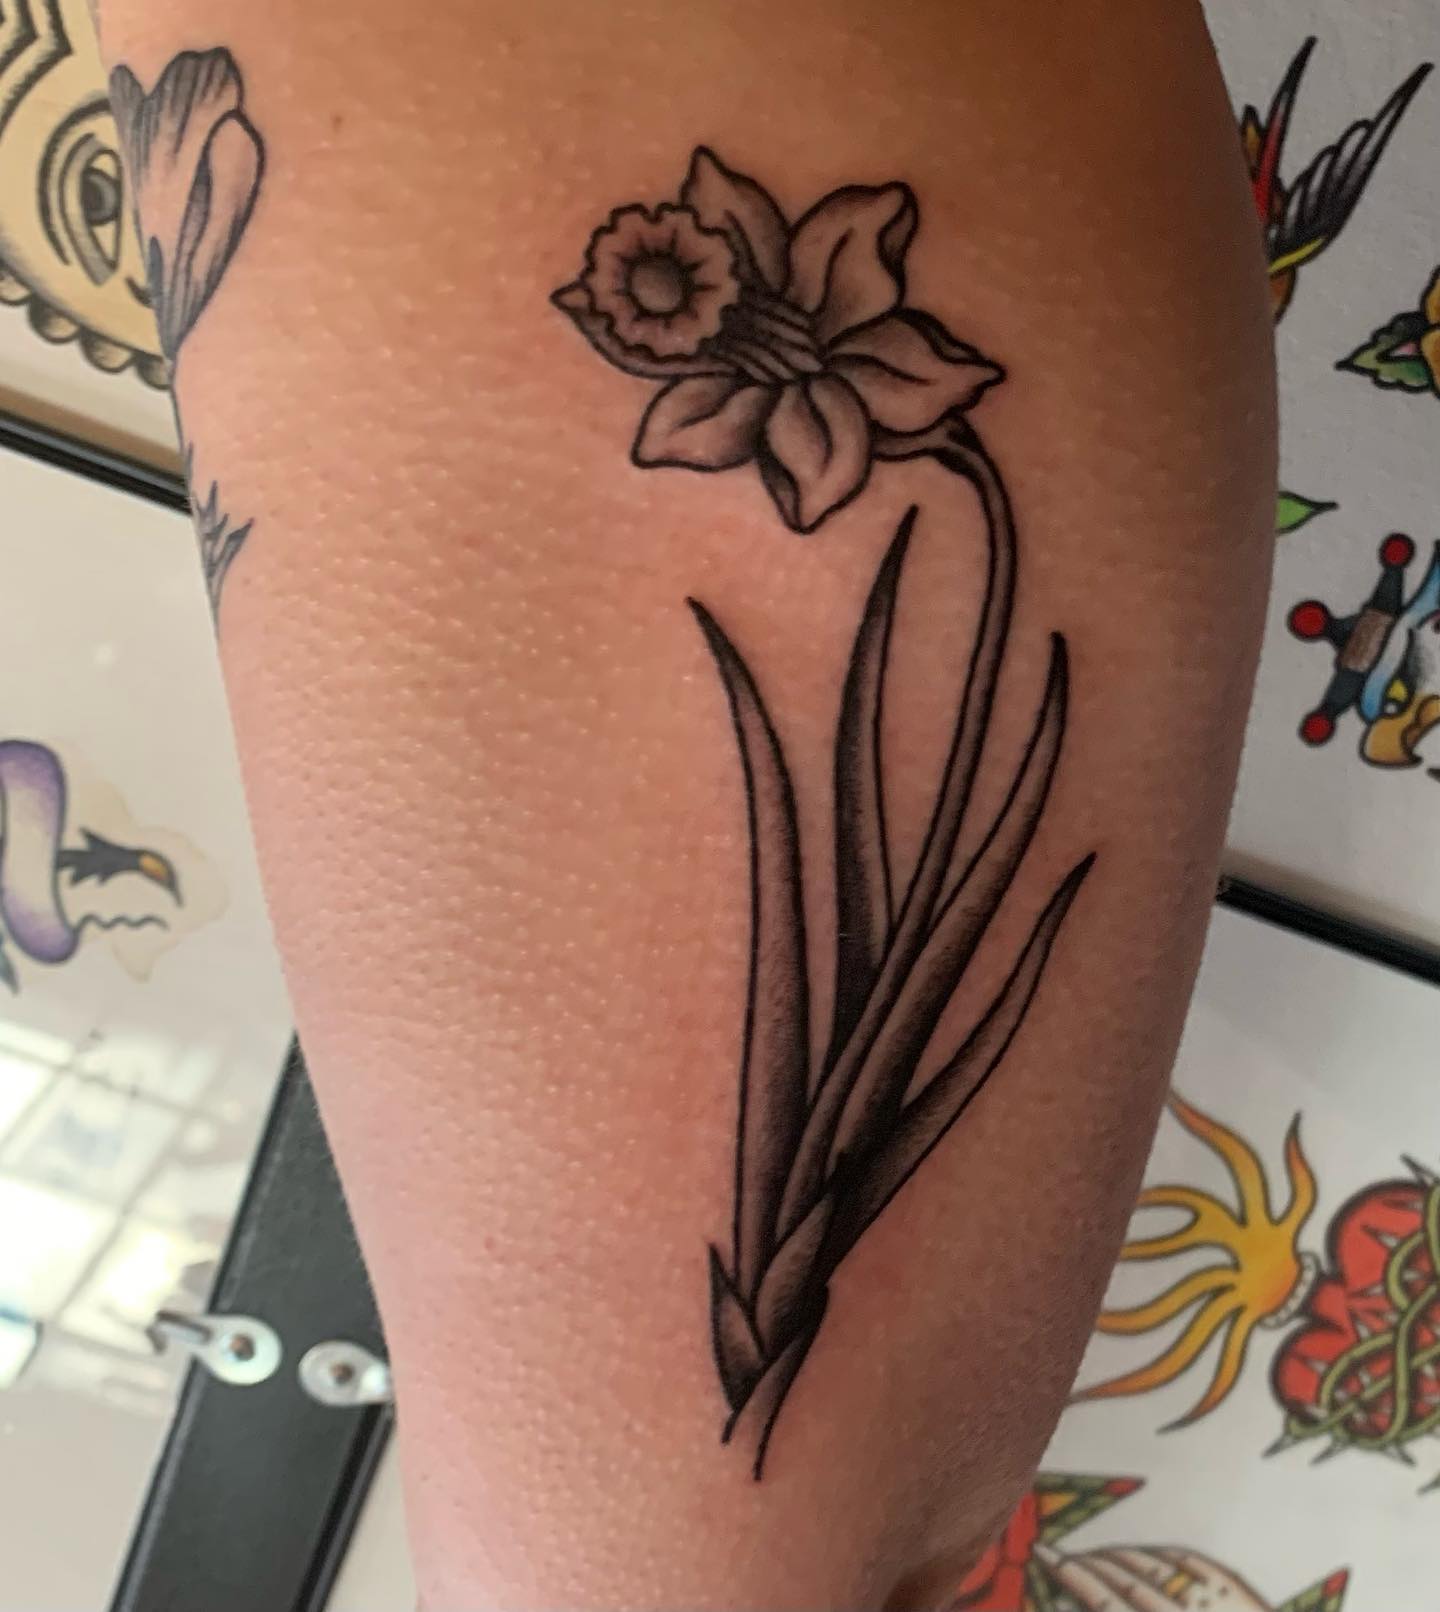 Birth Flower Tattoos Meanings and Designs  neartattoos